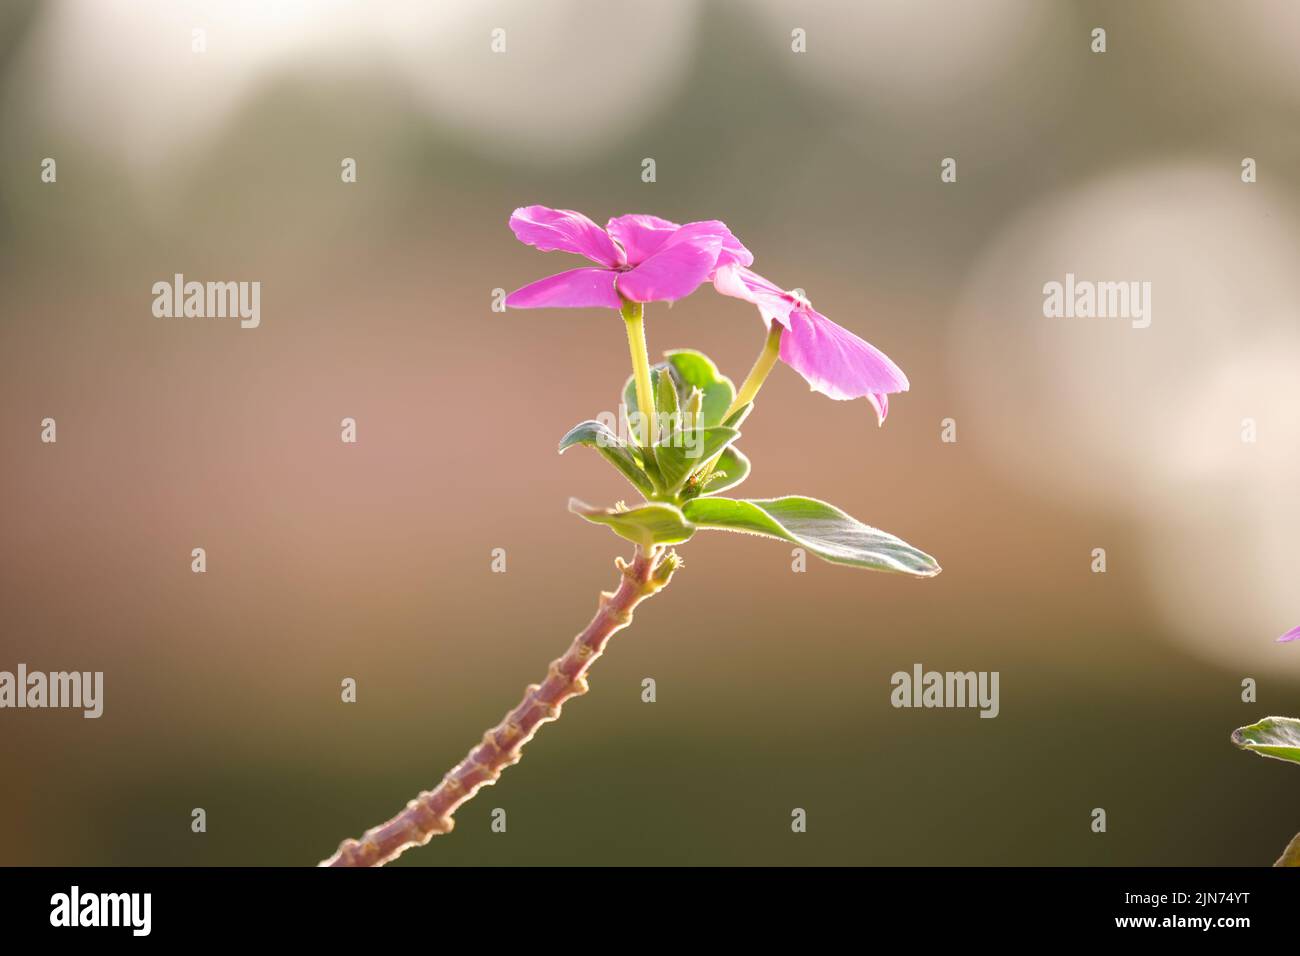 Tender pink flowers on long stem isolated on blurred abstract background Stock Photo